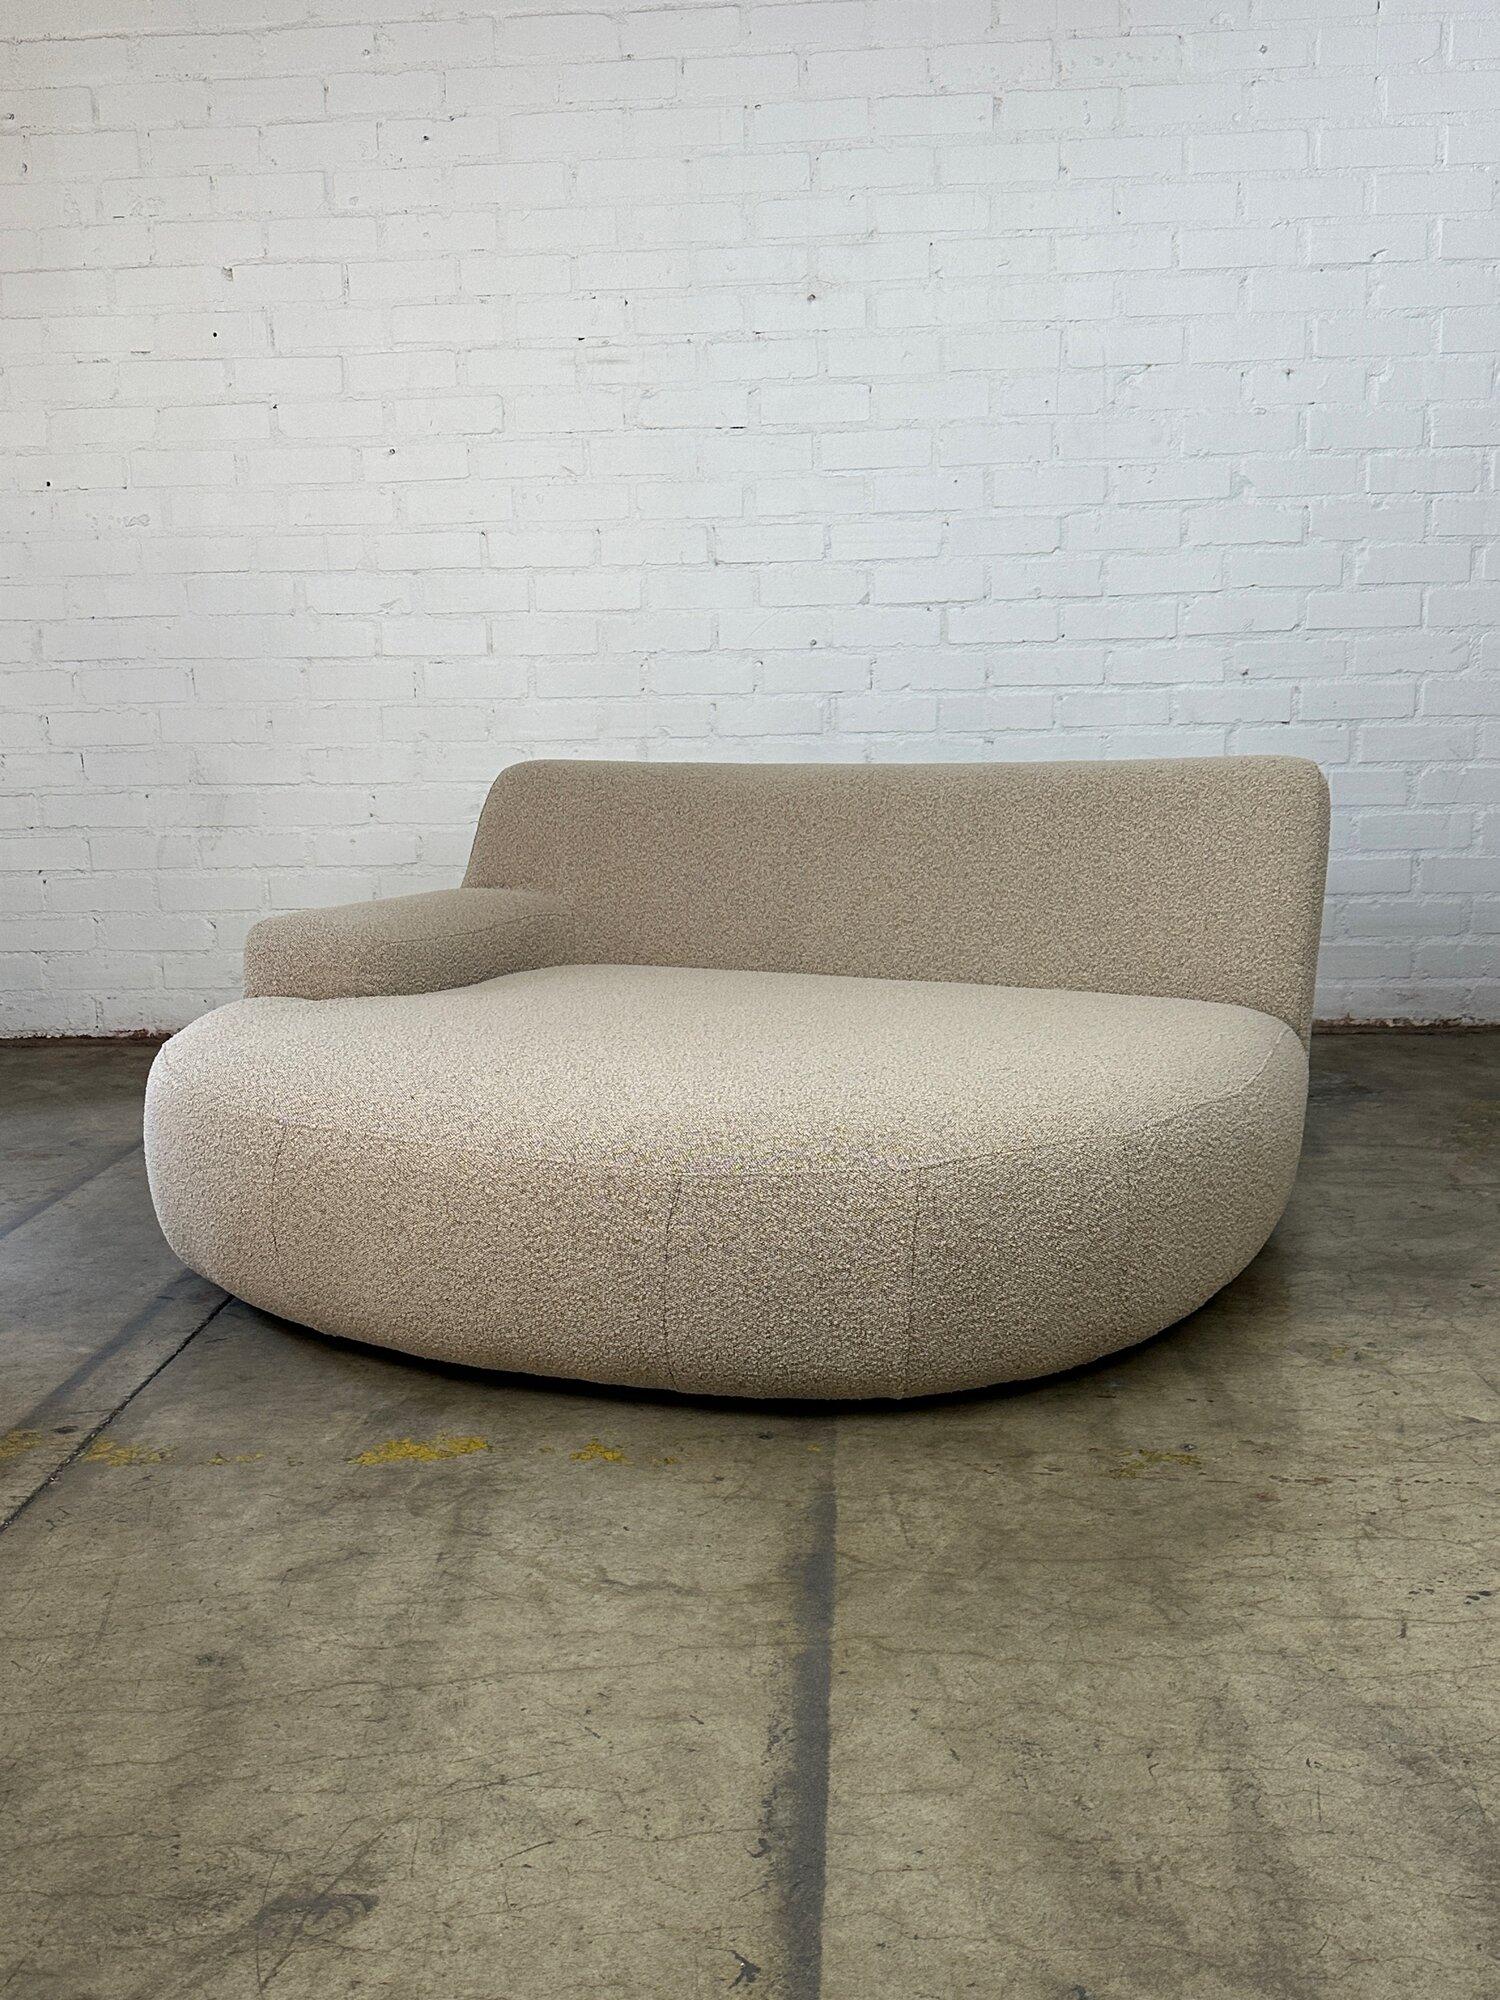 Oversized daybed in beige boucle In Good Condition For Sale In Los Angeles, CA